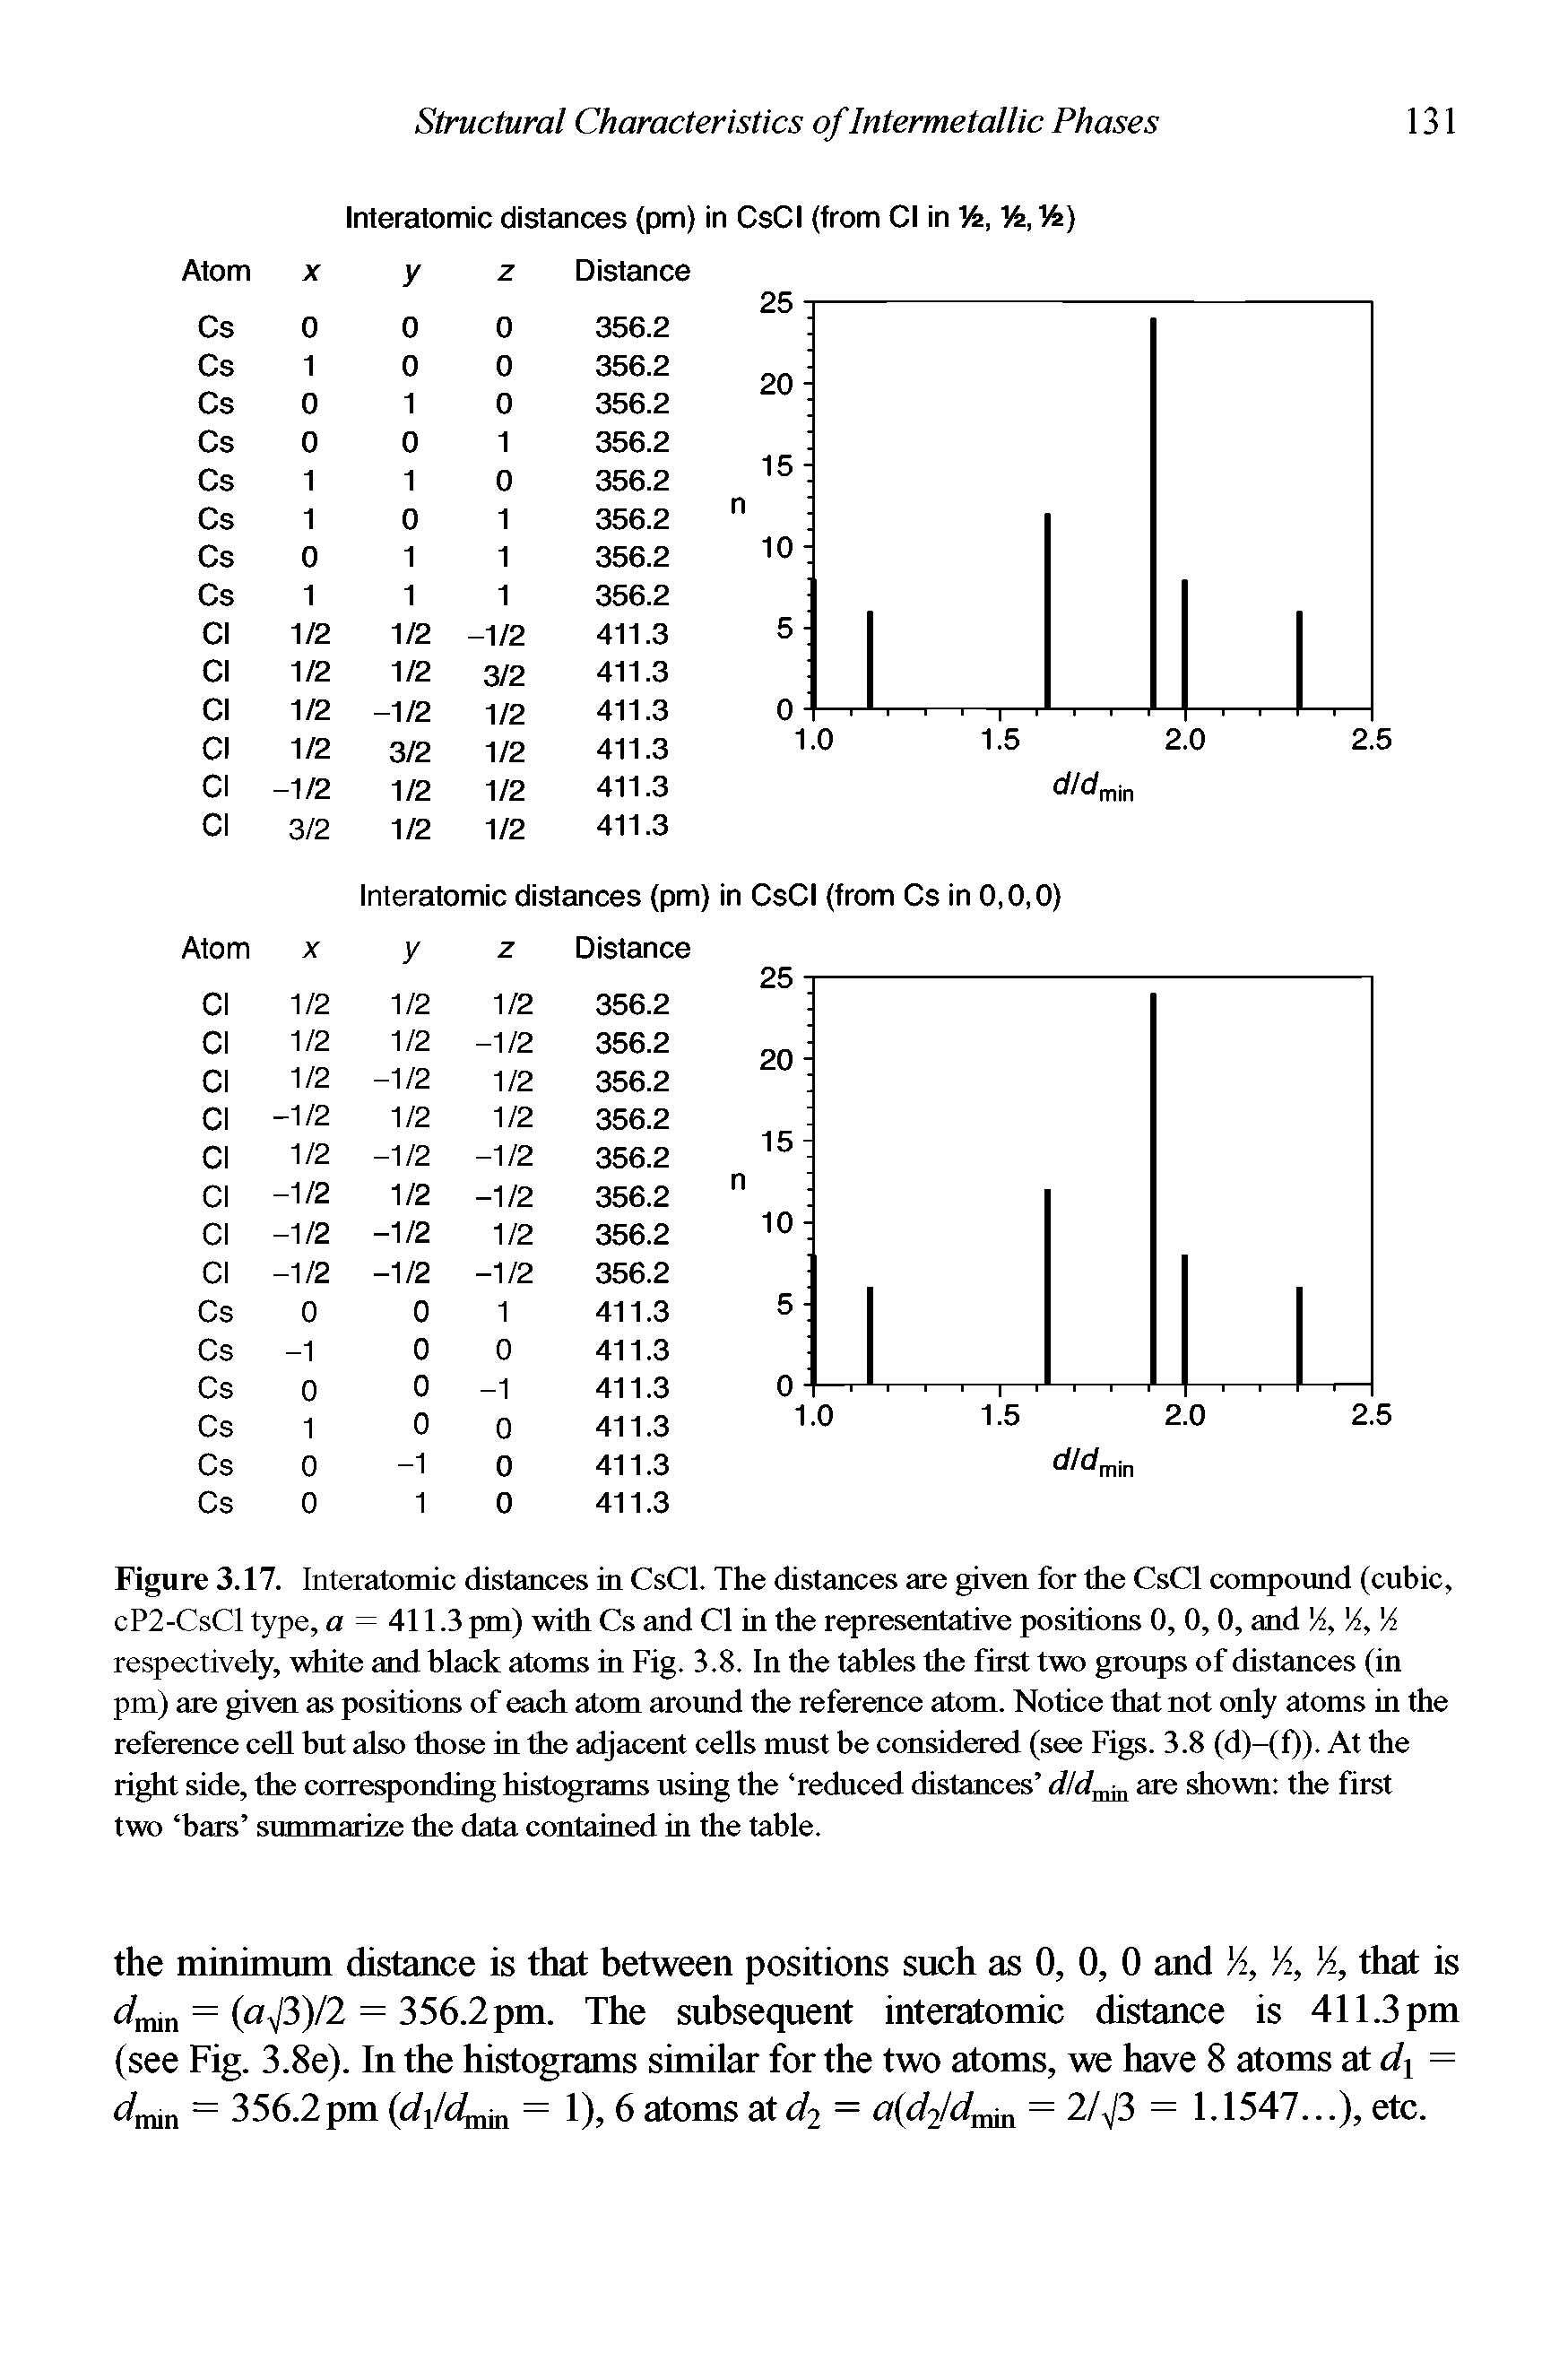 Figure 3.17. Interatomic distances in CsCI. The distances are given for the CsCI compound (cubic, cP2-CsCl type, a = 411.3 pm) with Cs and Cl in the representative positions 0, 0, 0, and A, A, A respectively, white and black atoms in Fig. 3.8. In the tables the first two groups of distances (in pm) are given as positions of each atom around the reference atom. Notice that not only atoms in the reference cell but also those in the adjacent cells must be considered (see Figs. 3.8 (d)-(f)). At the right side, the corresponding histograms using the reduced distances d/dmm are shown the first two bars summarize the data contained in the table.